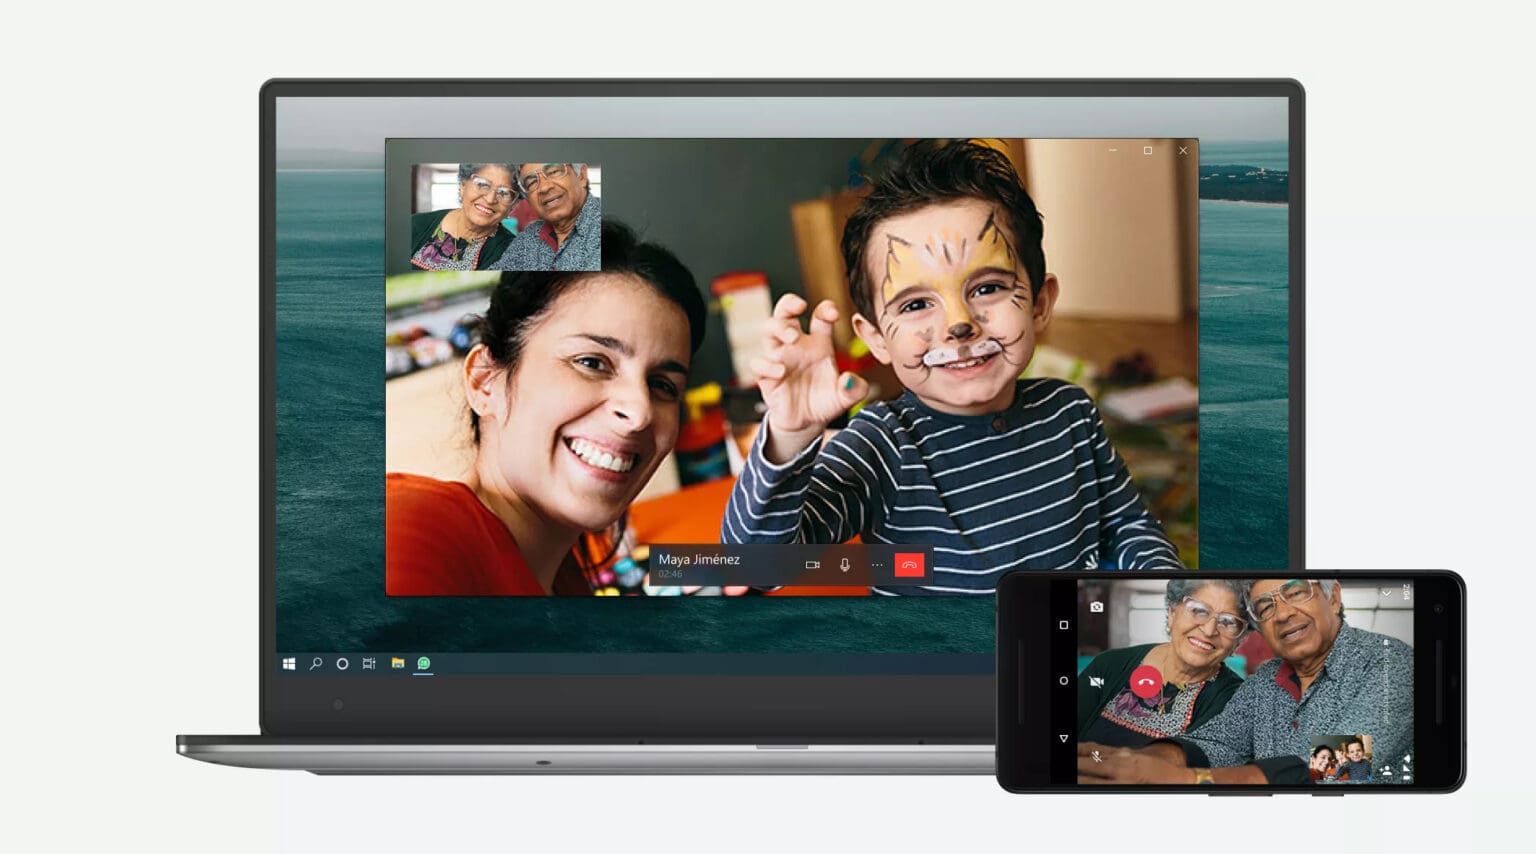 WhatsApp voice and video calling comes to desktop